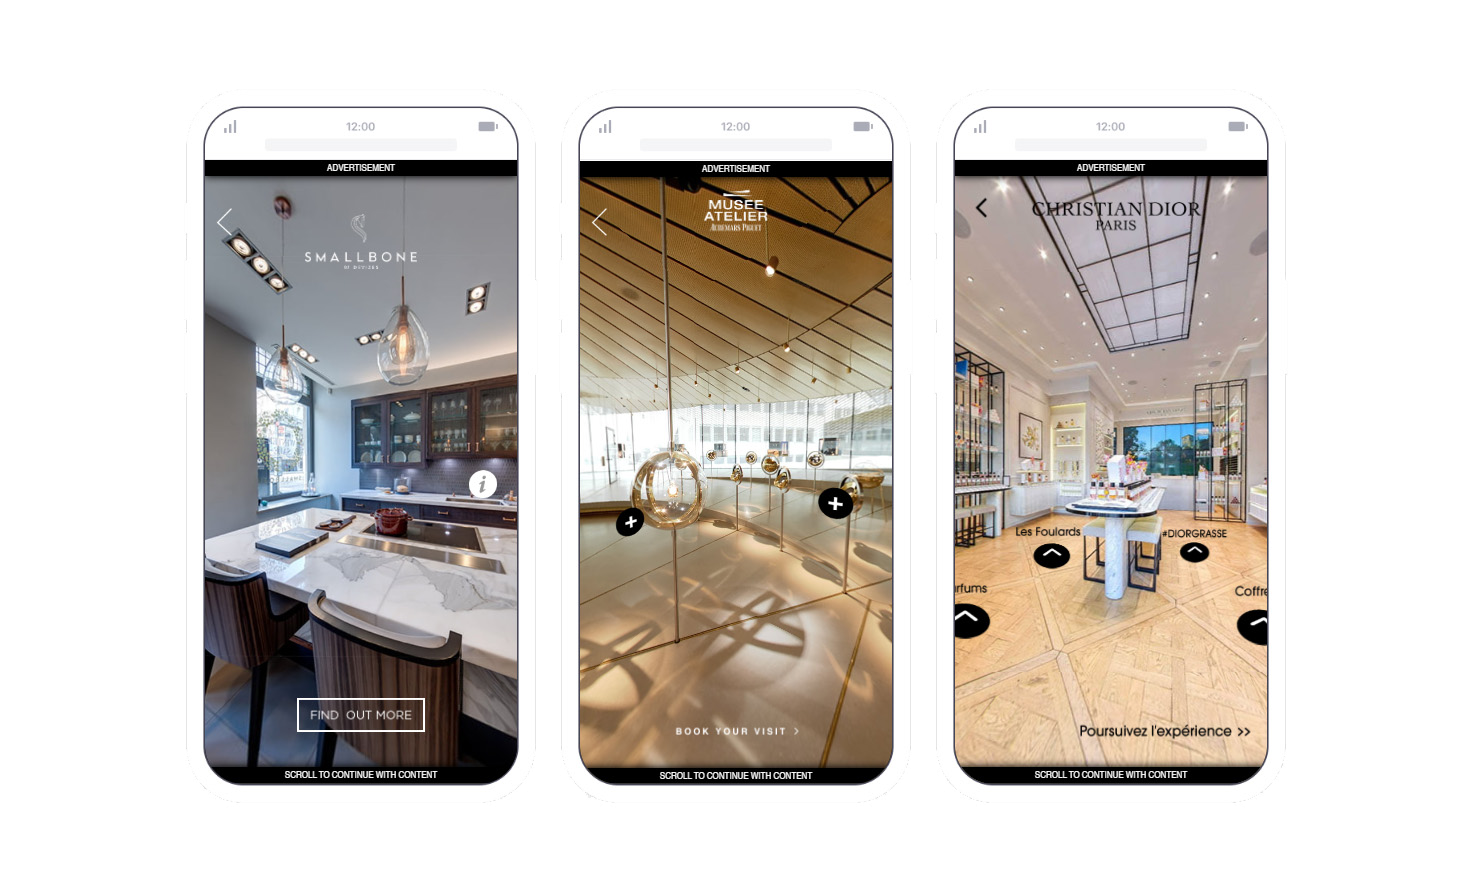 An immersive virtual tour product that allows brands to showcase shops, galleries or landmarks using ThreeJS and panoramic images to create life like scenes to explore.